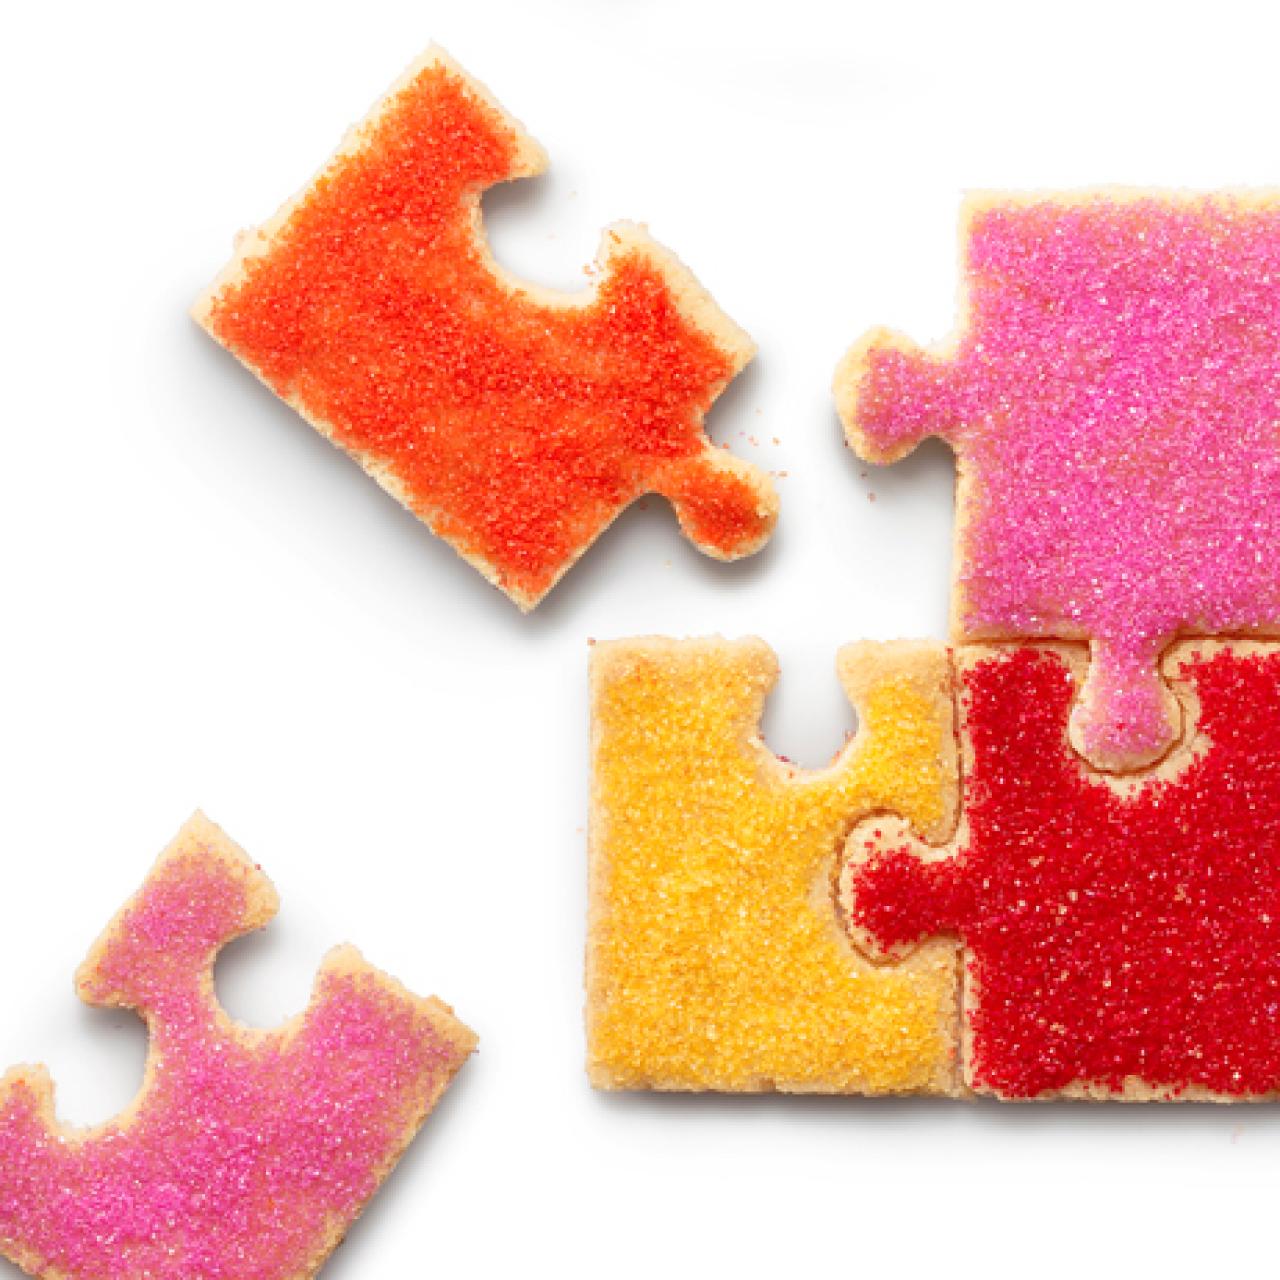 Puzzle Game - Four pieces puzzle - Jigsaw Puzzle - Cookie cutter